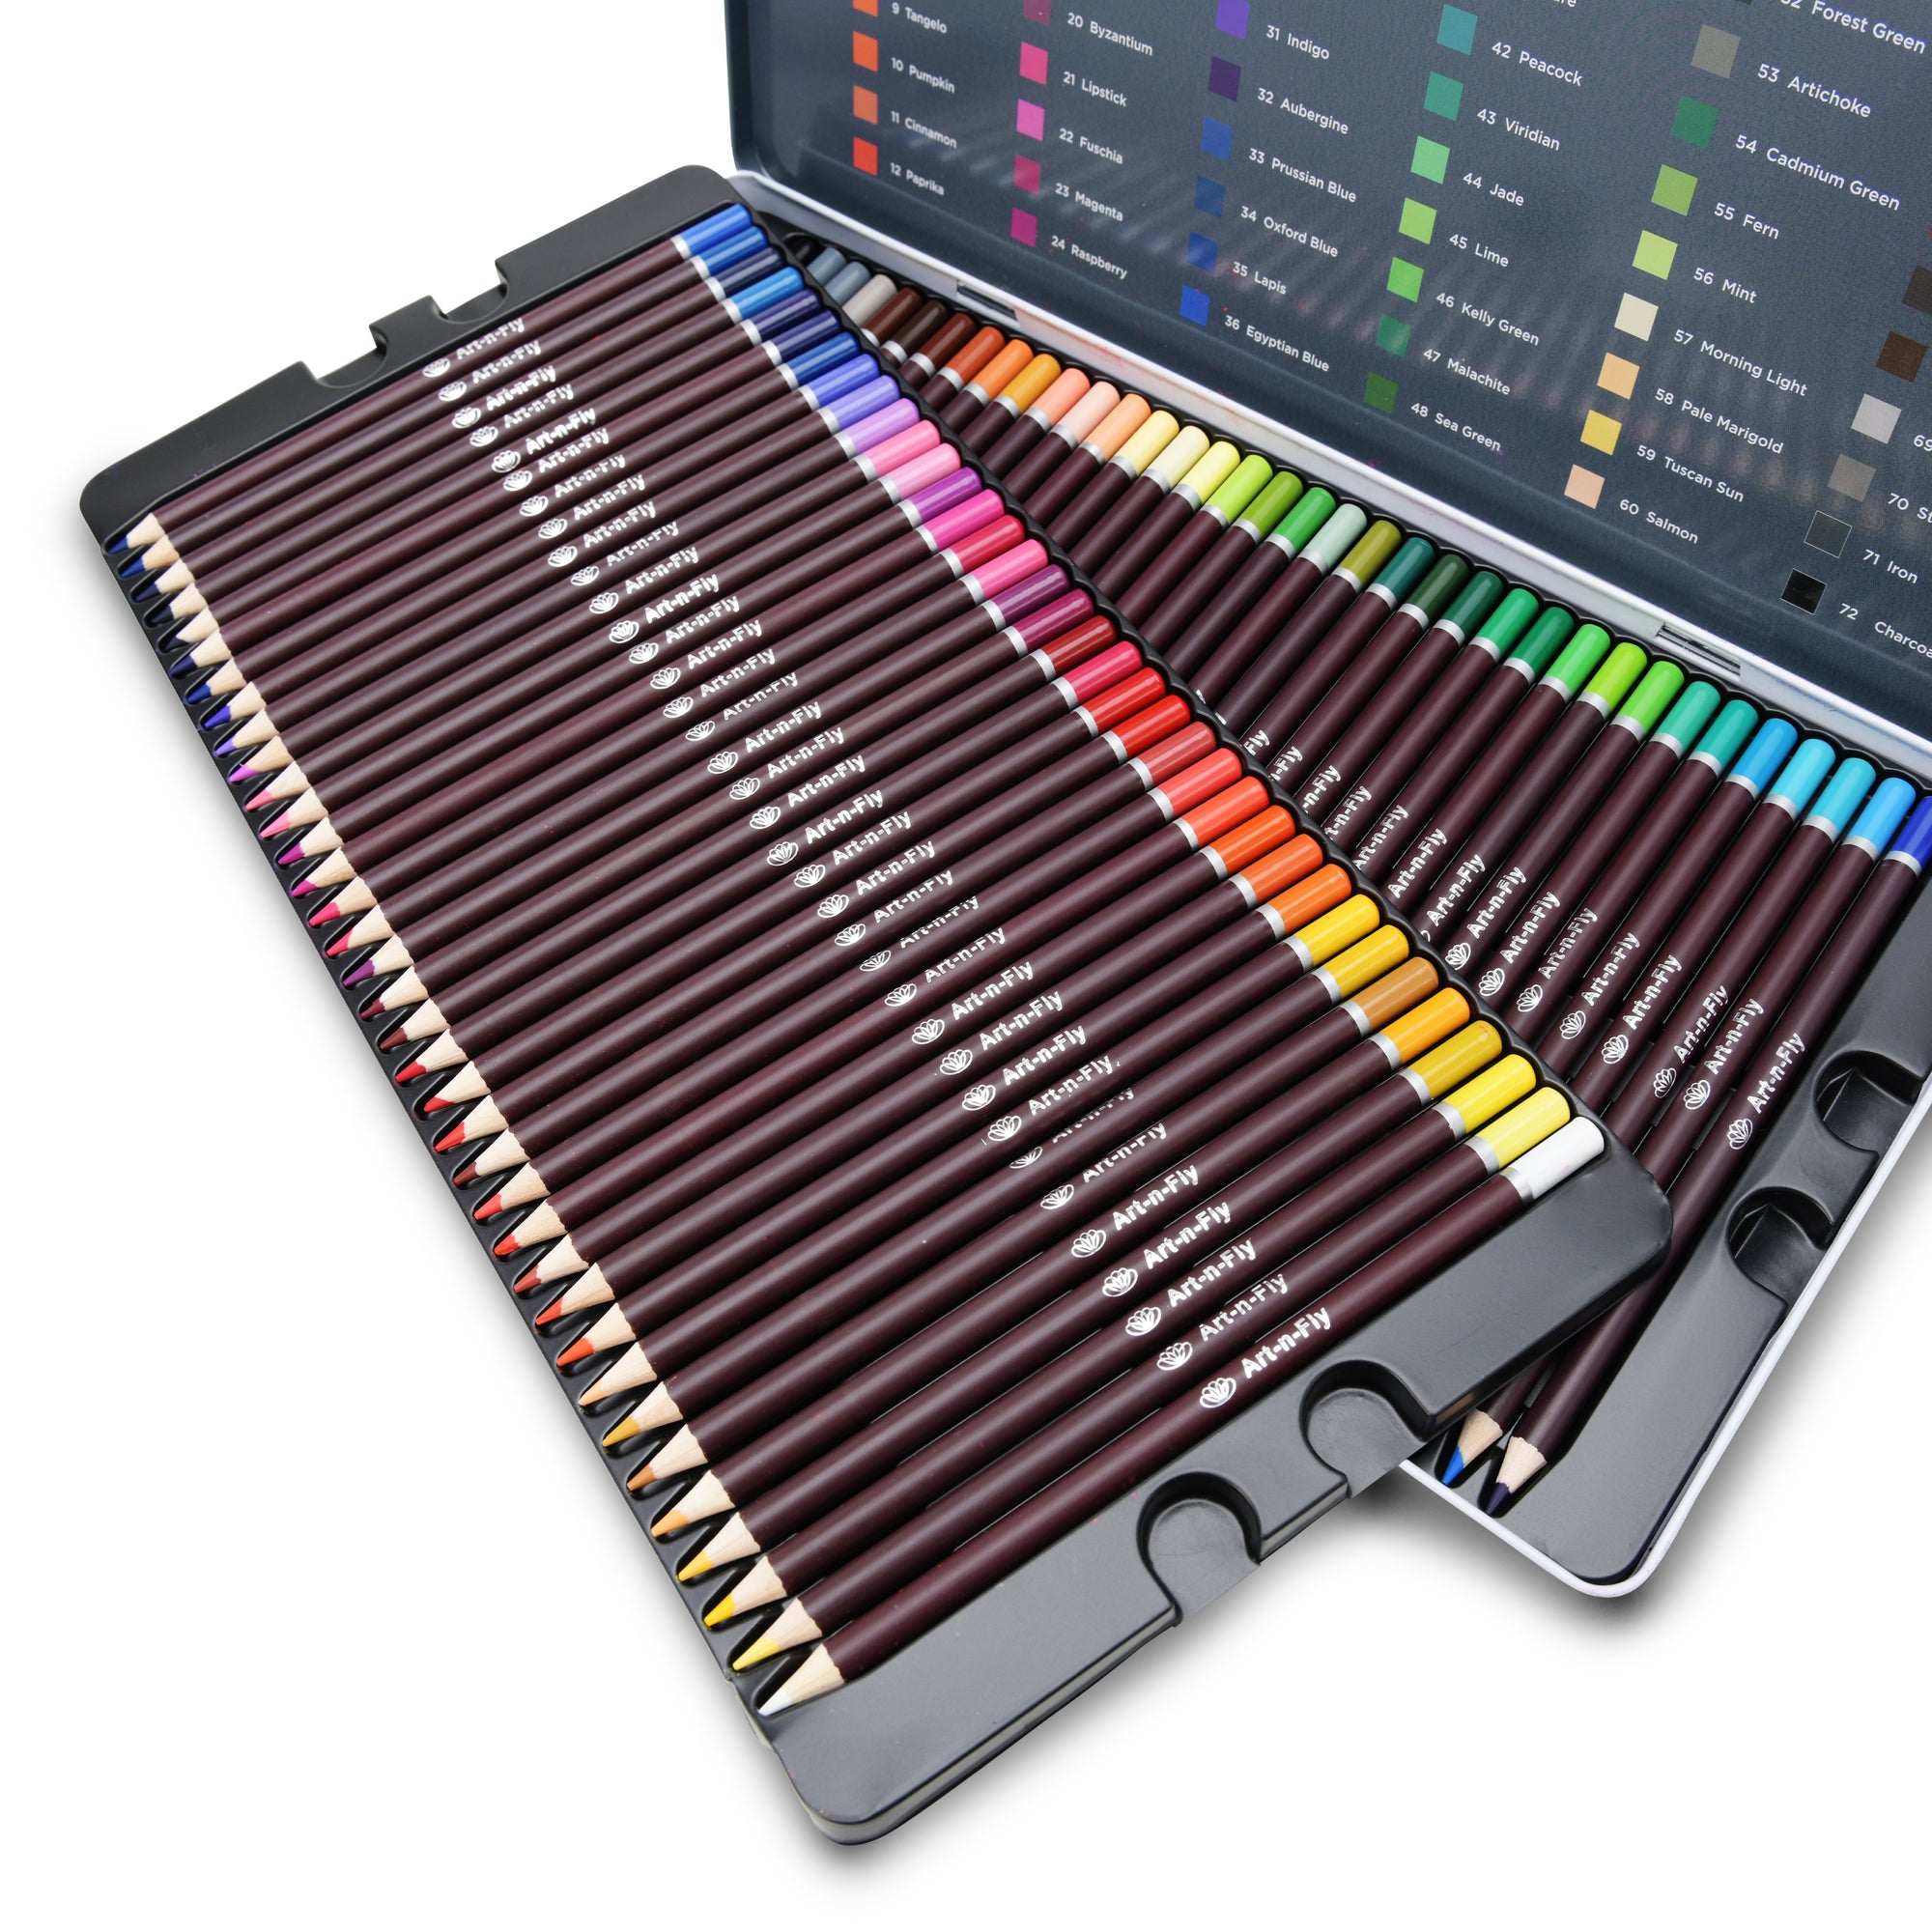 Art-n-fly 72 Professional Oil Based Colored Pencils for Artist in Metal Case - Great for Blending and Layering